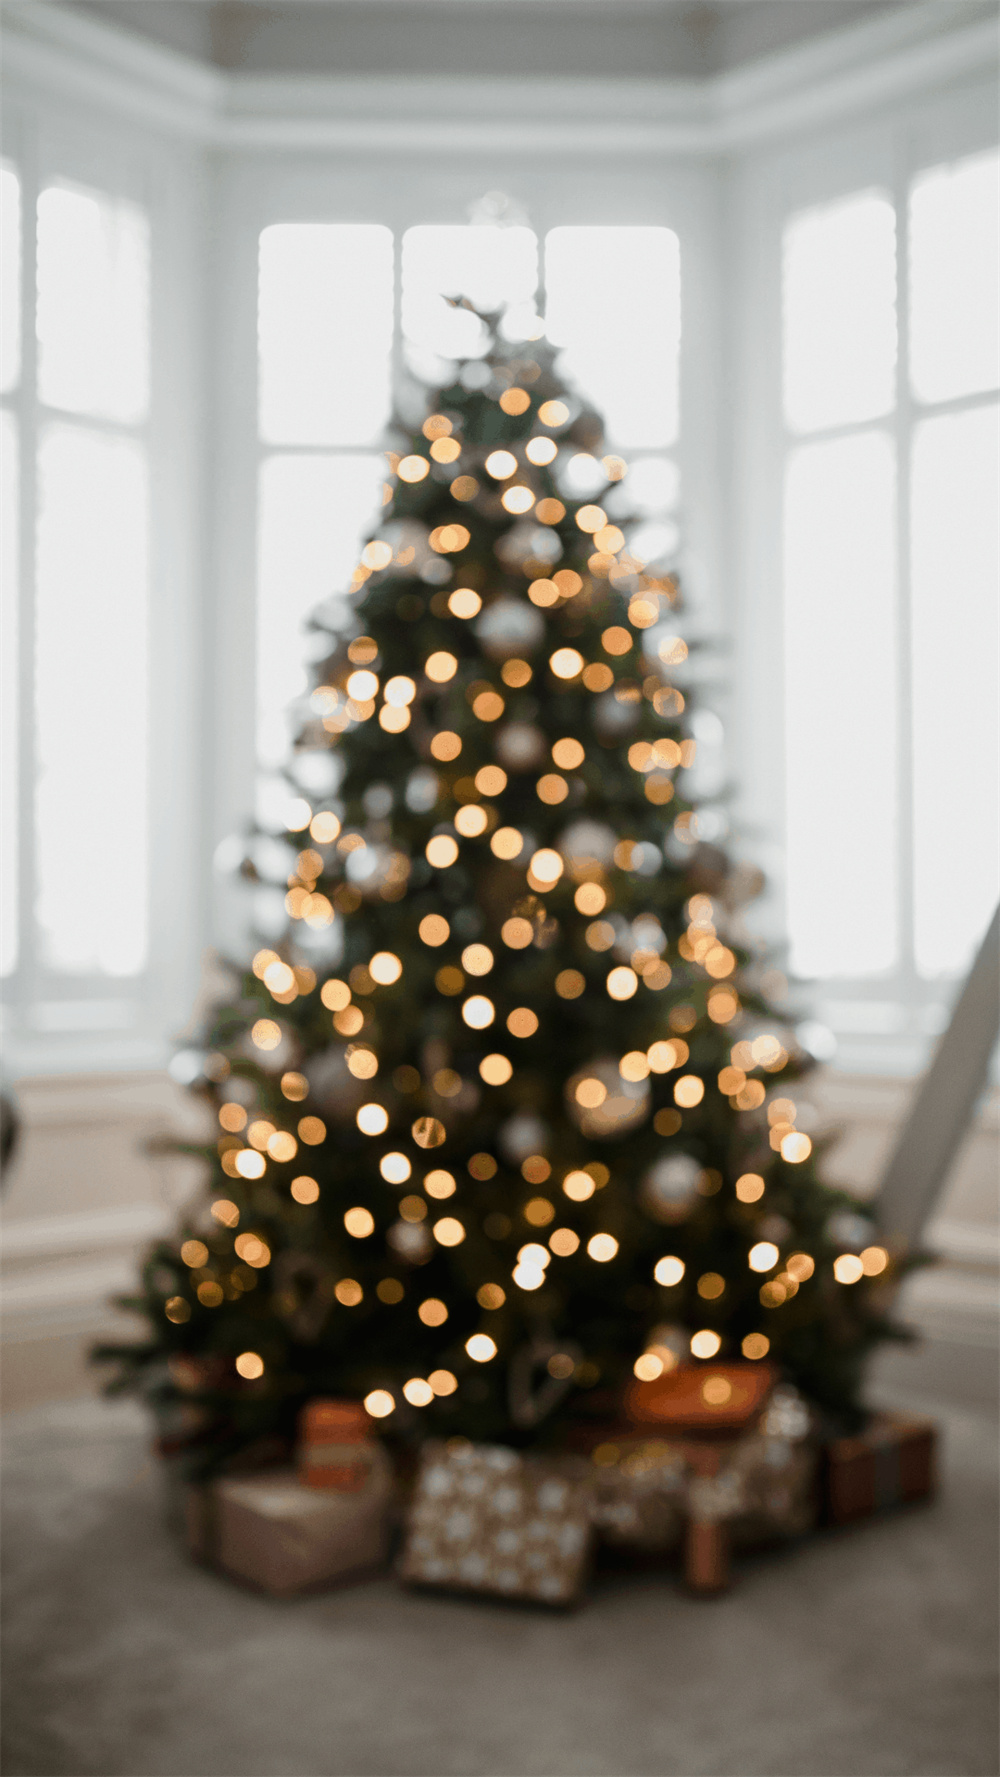 Christmas iPhone Wallpaper with Christmas Trees